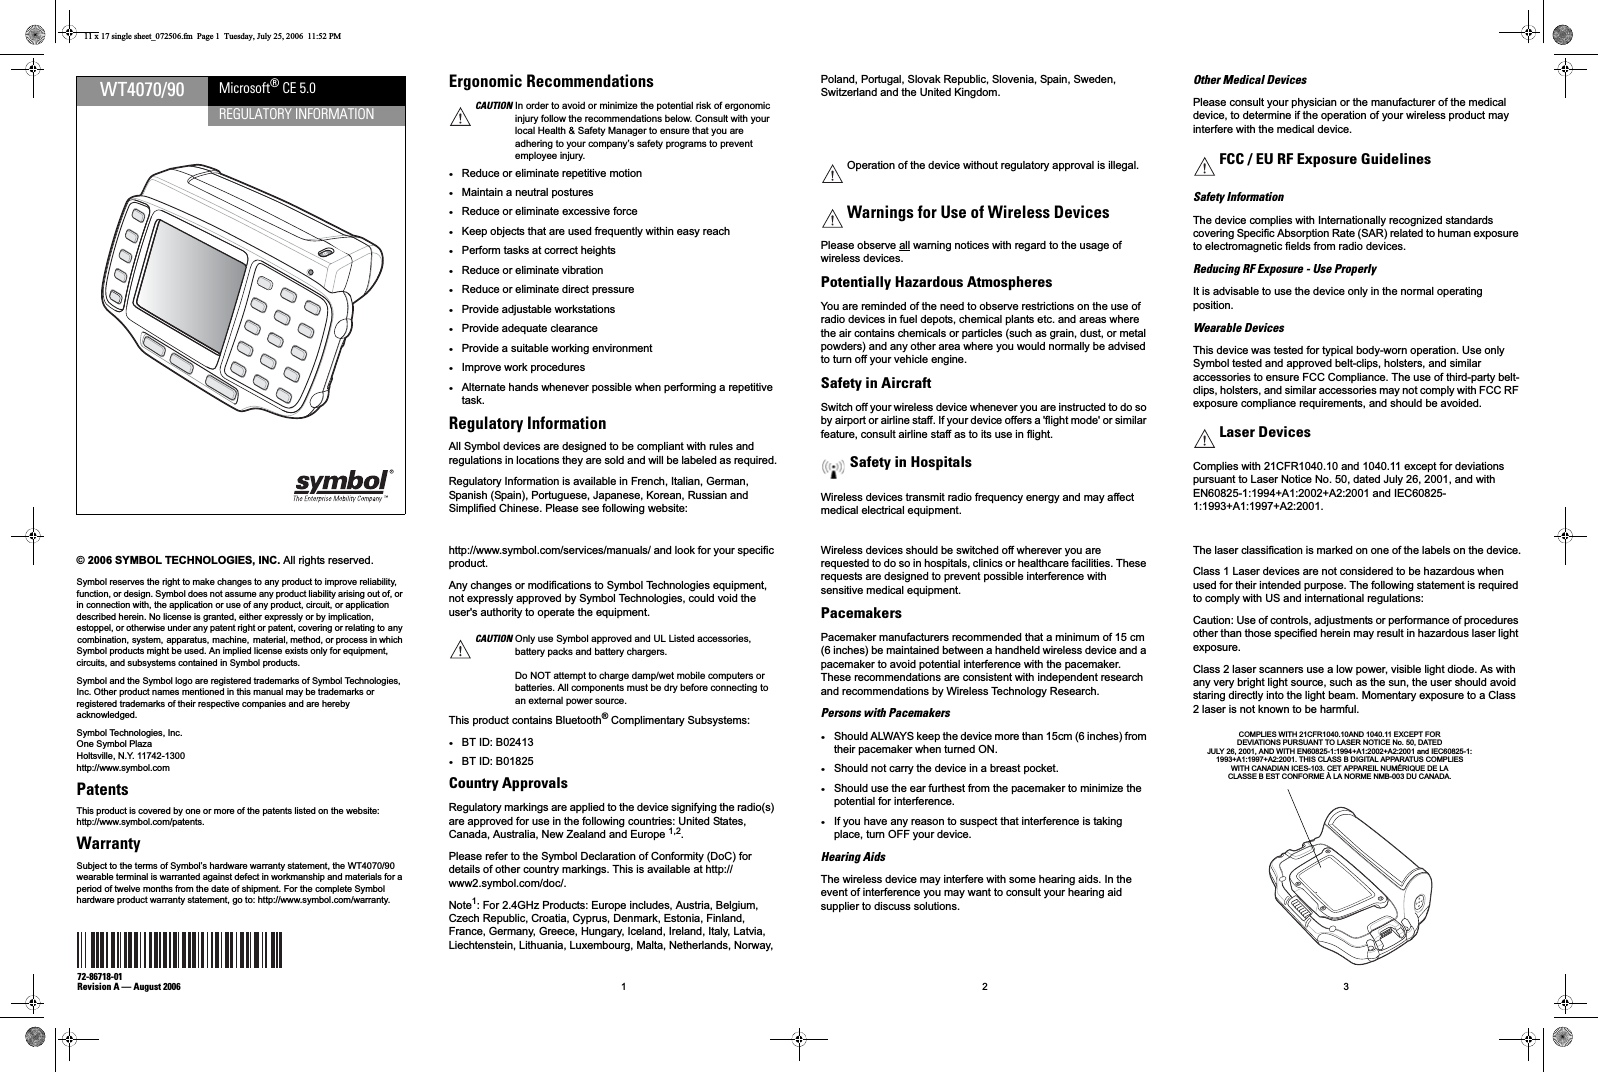 WT4070/90REGULATORY INFORMATIONMicrosoft® CE 5.0© 2006 SYMBOL TECHNOLOGIES, INC. All rights reserved.Symbol reserves the right to make changes to any product to improve reliability, function, or design. Symbol does not assume any product liability arising out of, or in connection with, the application or use of any product, circuit, or application described herein. No license is granted, either expressly or by implication, estoppel, or otherwise under any patent right or patent, covering or relating to any combination, system, apparatus, machine,  material, method, or process in which Symbol products might be used. An implied license exists only for equipment, circuits, and subsystems contained in Symbol products.Symbol and the Symbol logo are registered trademarks of Symbol Technologies, Inc. Other product names mentioned in this manual may be trademarks or registered trademarks of their respective companies and are hereby acknowledged.Symbol Technologies, Inc.One Symbol PlazaHoltsville, N.Y. 11742-1300http://www.symbol.comPatentsThis product is covered by one or more of the patents listed on the website:http://www.symbol.com/patents.WarrantySubject to the terms of Symbol’s hardware warranty statement, the WT4070/90 wearable terminal is warranted against defect in workmanship and materials for a period of twelve months from the date of shipment. For the complete Symbol hardware product warranty statement, go to: http://www.symbol.com/warranty.72-86718-01Revision A — August 2006 1 2 3Ergonomic Recommendations•Reduce or eliminate repetitive motion•Maintain a neutral postures•Reduce or eliminate excessive force•Keep objects that are used frequently within easy reach•Perform tasks at correct heights•Reduce or eliminate vibration•Reduce or eliminate direct pressure•Provide adjustable workstations•Provide adequate clearance•Provide a suitable working environment•Improve work procedures•Alternate hands whenever possible when performing a repetitive task.Regulatory InformationAll Symbol devices are designed to be compliant with rules and regulations in locations they are sold and will be labeled as required.Regulatory Information is available in French, Italian, German, Spanish (Spain), Portuguese, Japanese, Korean, Russian and Simplified Chinese. Please see following website: CAUTION In order to avoid or minimize the potential risk of ergonomic injury follow the recommendations below. Consult with your local Health &amp; Safety Manager to ensure that you are adhering to your company’s safety programs to prevent employee injury.http://www.symbol.com/services/manuals/ and look for your specific product. Any changes or modifications to Symbol Technologies equipment, not expressly approved by Symbol Technologies, could void the user&apos;s authority to operate the equipment.This product contains Bluetooth® Complimentary Subsystems:•BT ID: B02413•BT ID: B01825Country Approvals Regulatory markings are applied to the device signifying the radio(s) are approved for use in the following countries: United States, Canada, Australia, New Zealand and Europe 1,2.Please refer to the Symbol Declaration of Conformity (DoC) for details of other country markings. This is available at http://www2.symbol.com/doc/.Note1: For 2.4GHz Products: Europe includes, Austria, Belgium, Czech Republic, Croatia, Cyprus, Denmark, Estonia, Finland, France, Germany, Greece, Hungary, Iceland, Ireland, Italy, Latvia, Liechtenstein, Lithuania, Luxembourg, Malta, Netherlands, Norway, CAUTION Only use Symbol approved and UL Listed accessories, battery packs and battery chargers.Do NOT attempt to charge damp/wet mobile computers or batteries. All components must be dry before connecting to an external power source.Poland, Portugal, Slovak Republic, Slovenia, Spain, Sweden, Switzerland and the United Kingdom.Note2: The use of 5 GHz RLAN&apos;s has varying restrictions of use; please refer to the Symbol Declaration of Conformity (DoC) for details.Please observe all warning notices with regard to the usage of wireless devices.Potentially Hazardous AtmospheresYou are reminded of the need to observe restrictions on the use of radio devices in fuel depots, chemical plants etc. and areas where the air contains chemicals or particles (such as grain, dust, or metal powders) and any other area where you would normally be advised to turn off your vehicle engine.Safety in AircraftSwitch off your wireless device whenever you are instructed to do so by airport or airline staff. If your device offers a &apos;flight mode&apos; or similar feature, consult airline staff as to its use in flight.Wireless devices transmit radio frequency energy and may affect medical electrical equipment.Operation of the device without regulatory approval is illegal.Warnings for Use of Wireless DevicesSafety in HospitalsWireless devices should be switched off wherever you are requested to do so in hospitals, clinics or healthcare facilities. These requests are designed to prevent possible interference with sensitive medical equipment.PacemakersPacemaker manufacturers recommended that a minimum of 15 cm (6 inches) be maintained between a handheld wireless device and a pacemaker to avoid potential interference with the pacemaker. These recommendations are consistent with independent research and recommendations by Wireless Technology Research.Persons with Pacemakers•Should ALWAYS keep the device more than 15cm (6 inches) from their pacemaker when turned ON.•Should not carry the device in a breast pocket.•Should use the ear furthest from the pacemaker to minimize the potential for interference.•If you have any reason to suspect that interference is taking place, turn OFF your device.Hearing AidsThe wireless device may interfere with some hearing aids. In the event of interference you may want to consult your hearing aid supplier to discuss solutions.Other Medical DevicesPlease consult your physician or the manufacturer of the medical device, to determine if the operation of your wireless product may interfere with the medical device.Safety InformationThe device complies with Internationally recognized standards covering Specific Absorption Rate (SAR) related to human exposure to electromagnetic fields from radio devices.Reducing RF Exposure - Use ProperlyIt is advisable to use the device only in the normal operating position.Wearable DevicesThis device was tested for typical body-worn operation. Use only Symbol tested and approved belt-clips, holsters, and similar accessories to ensure FCC Compliance. The use of third-party belt-clips, holsters, and similar accessories may not comply with FCC RF exposure compliance requirements, and should be avoided.Complies with 21CFR1040.10 and 1040.11 except for deviations pursuant to Laser Notice No. 50, dated July 26, 2001, and with EN60825-1:1994+A1:2002+A2:2001 and IEC60825-1:1993+A1:1997+A2:2001.FCC / EU RF Exposure GuidelinesLaser DevicesThe laser classification is marked on one of the labels on the device.Class 1 Laser devices are not considered to be hazardous when used for their intended purpose. The following statement is required to comply with US and international regulations:Caution: Use of controls, adjustments or performance of procedures other than those specified herein may result in hazardous laser light exposure.Class 2 laser scanners use a low power, visible light diode. As with any very bright light source, such as the sun, the user should avoid staring directly into the light beam. Momentary exposure to a Class 2 laser is not known to be harmful.COMPLIES WITH 21CFR1040.10AND 1040.11 EXCEPT FORDEVIATIONS PURSUANT TO LASER NOTICE No. 50, DATEDJULY 26, 2001, AND WITH EN60825-1:1994+A1:2002+A2:2001 and IEC60825-1:1993+A1:1997+A2:2001. THIS CLASS B DIGITAL APPARATUS COMPLIESWITH CANADIAN ICES-103. CET APPAREIL NUMÉRIQUE DE LACLASSE B EST CONFORME À LA NORME NMB-003 DU CANADA.11 x 17 single sheet_072506.fm  Page 1  Tuesday, July 25, 2006  11:52 PM